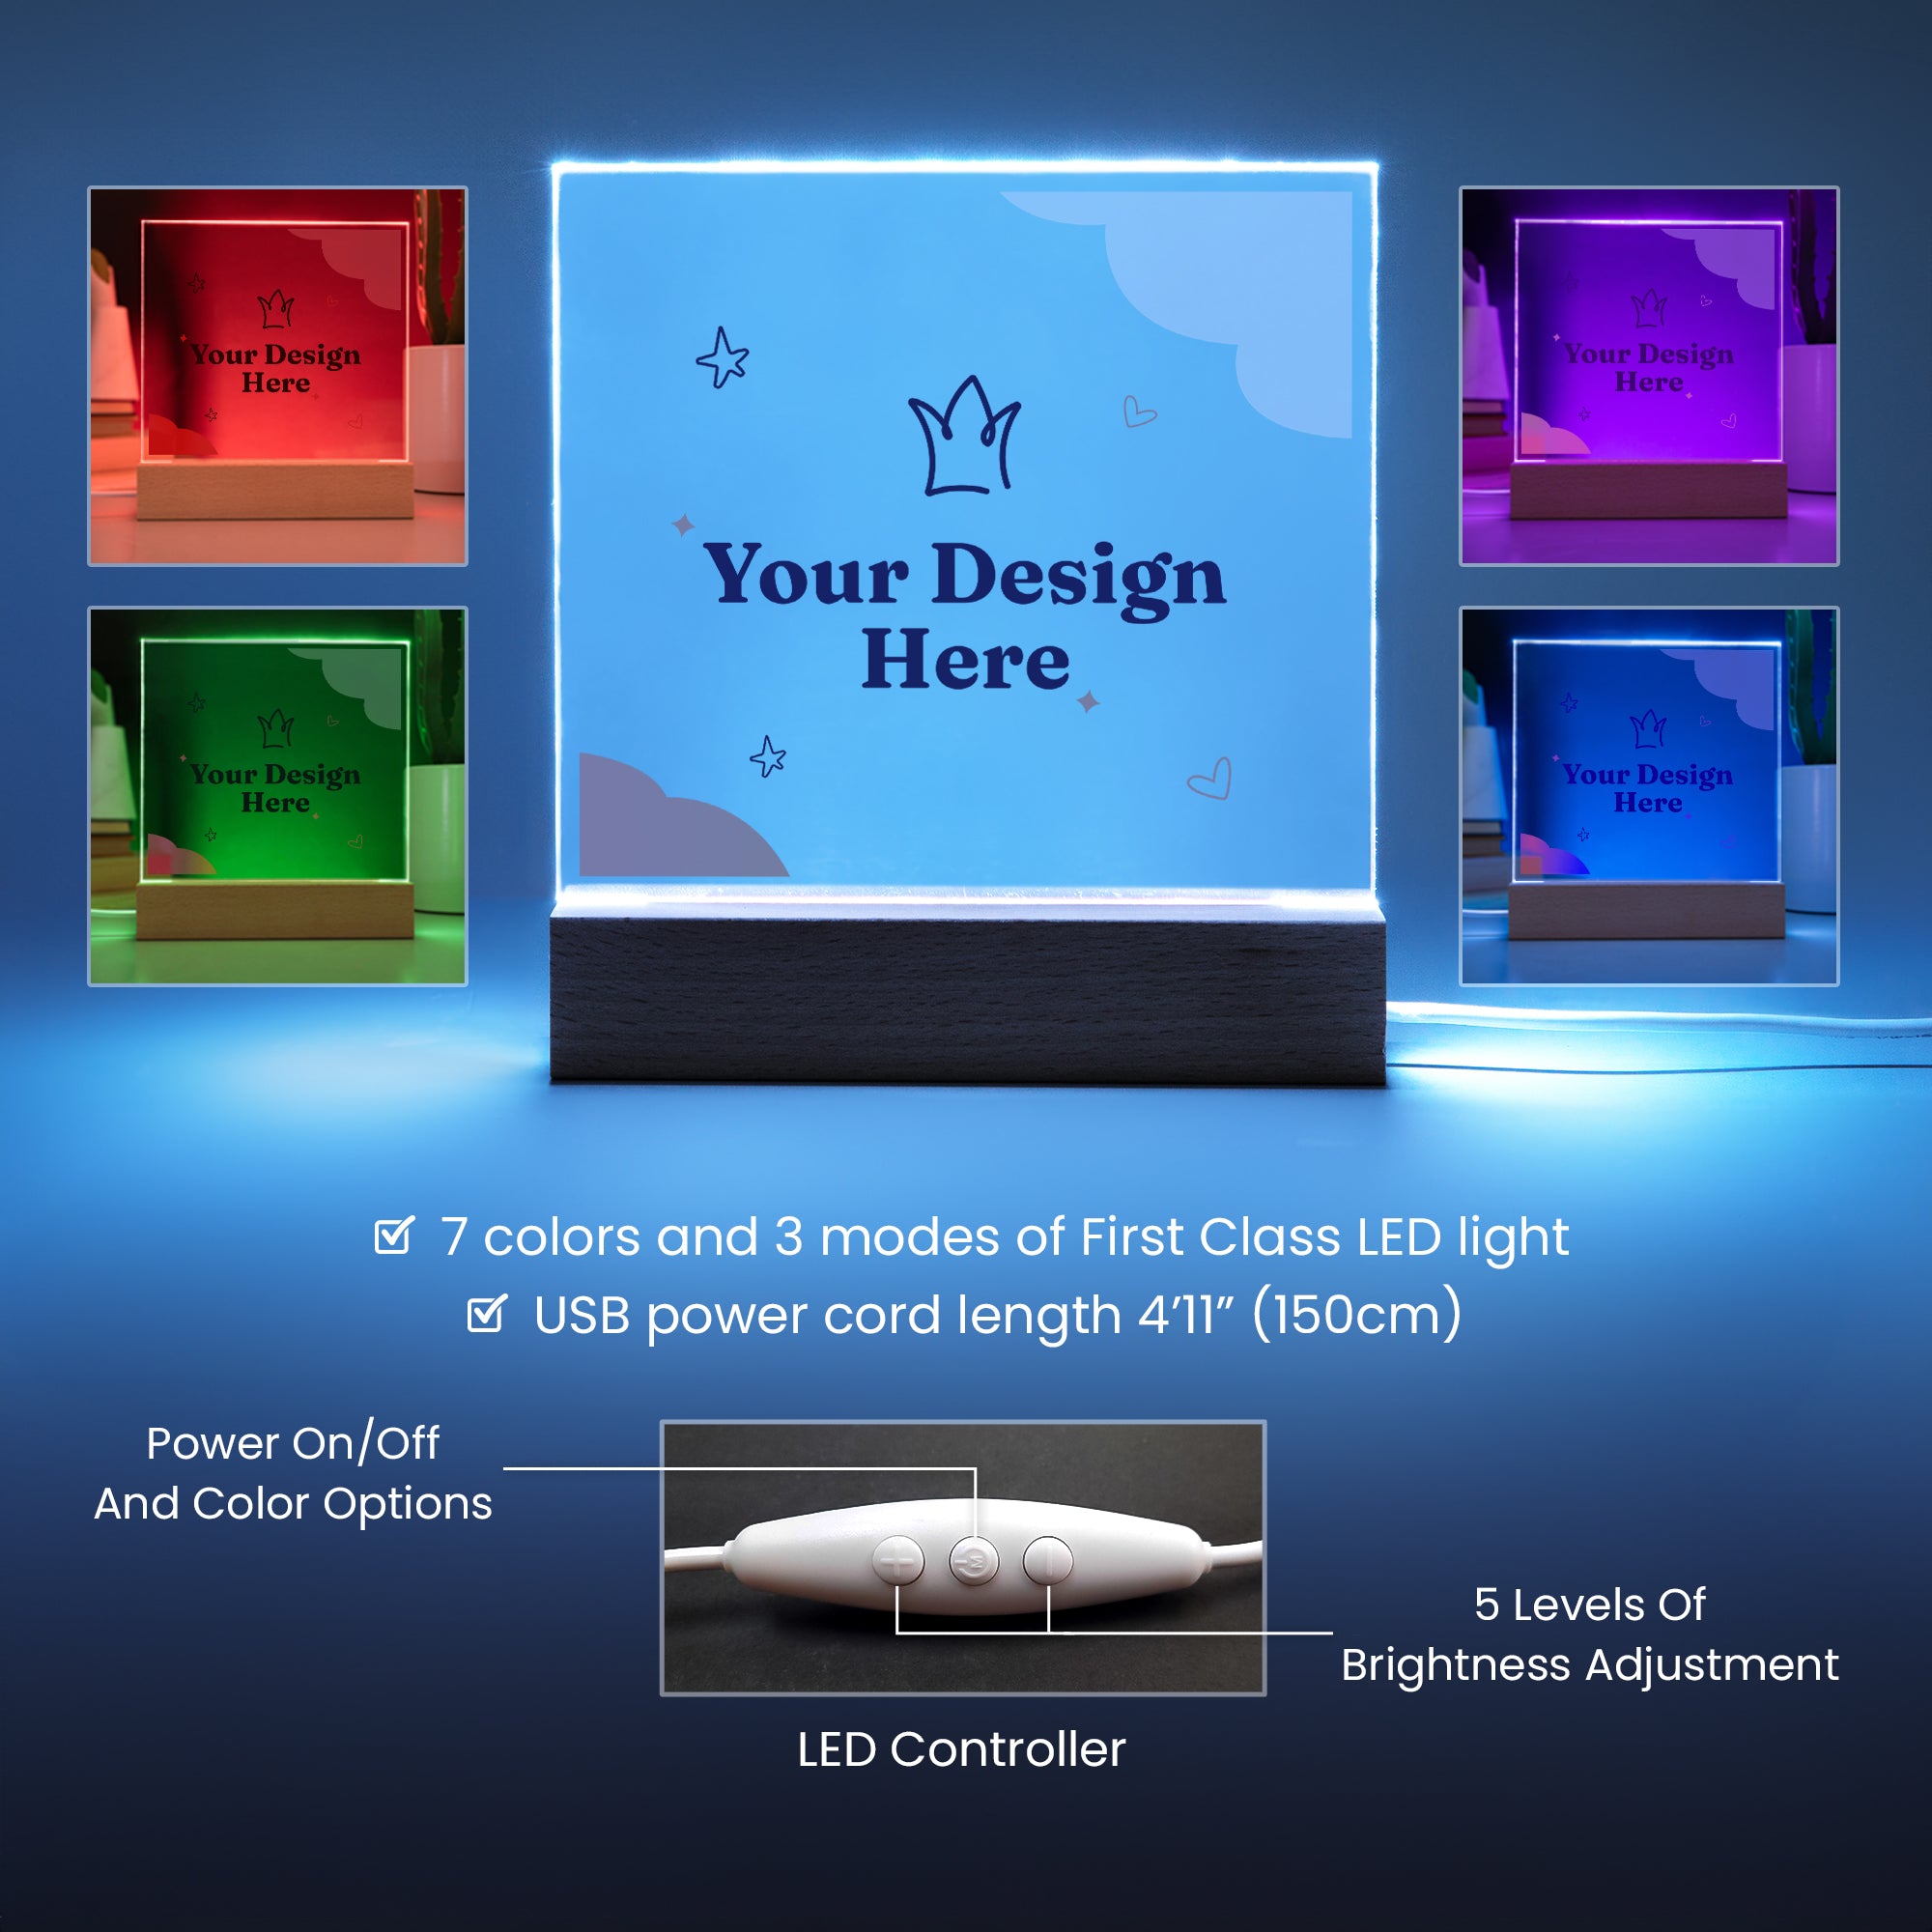 Design informational graphic for Acrylic LED features - 1.jpg__PID:172f8168-aa14-42db-96bf-6eff8ea868e8